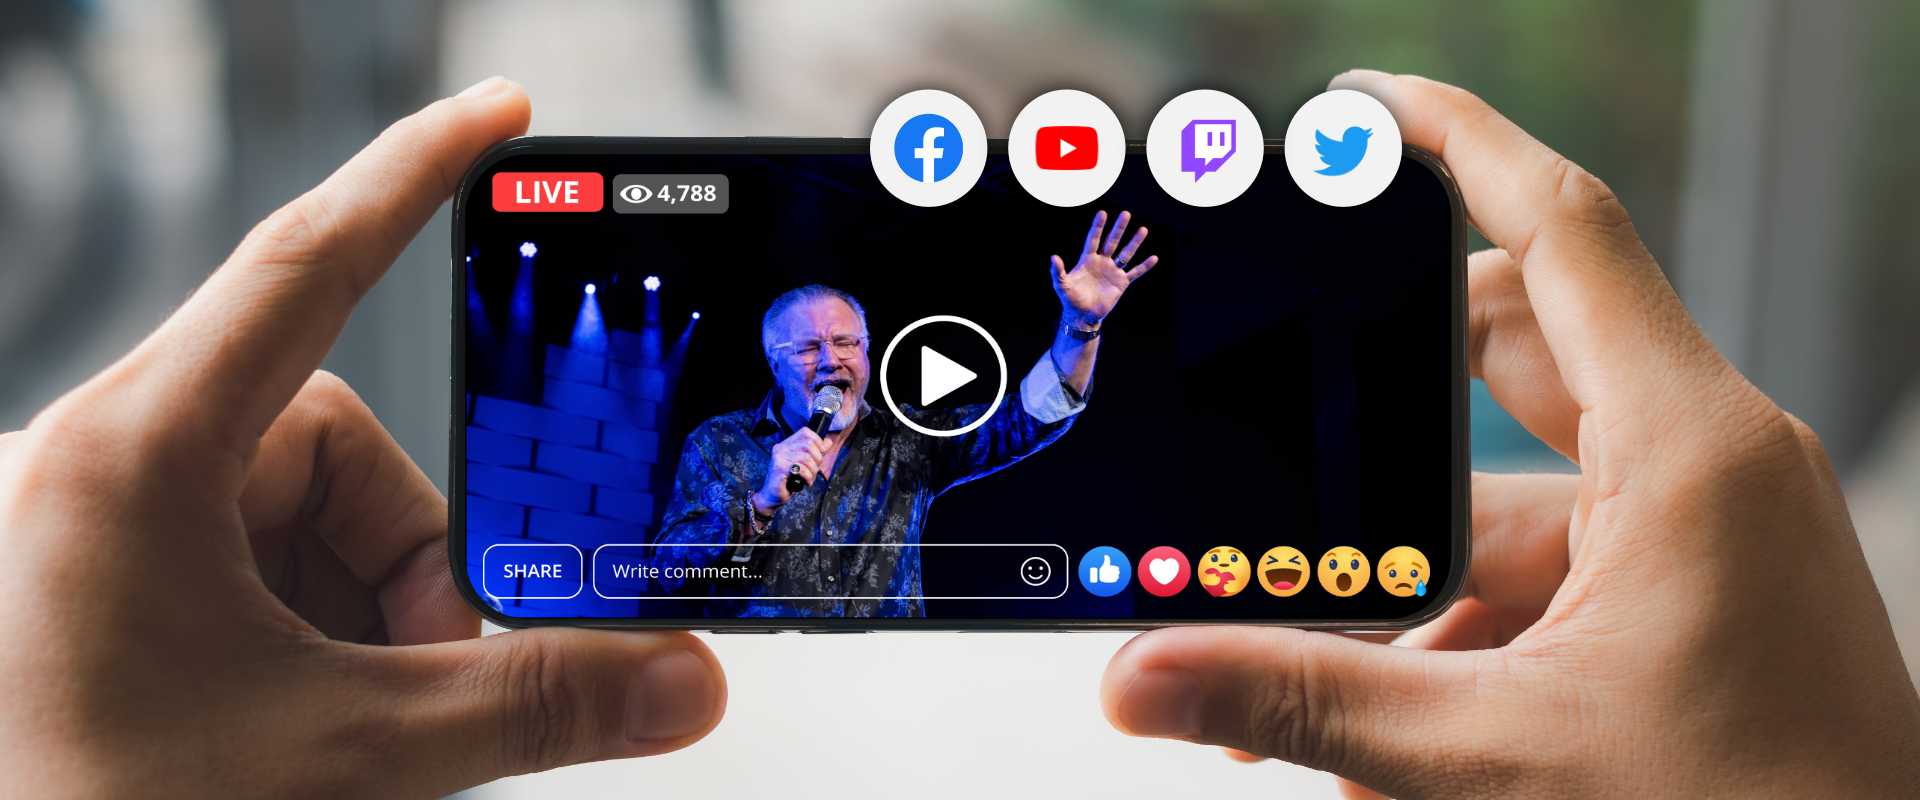 How to Create a High Quality Live Stream on Your iPhone